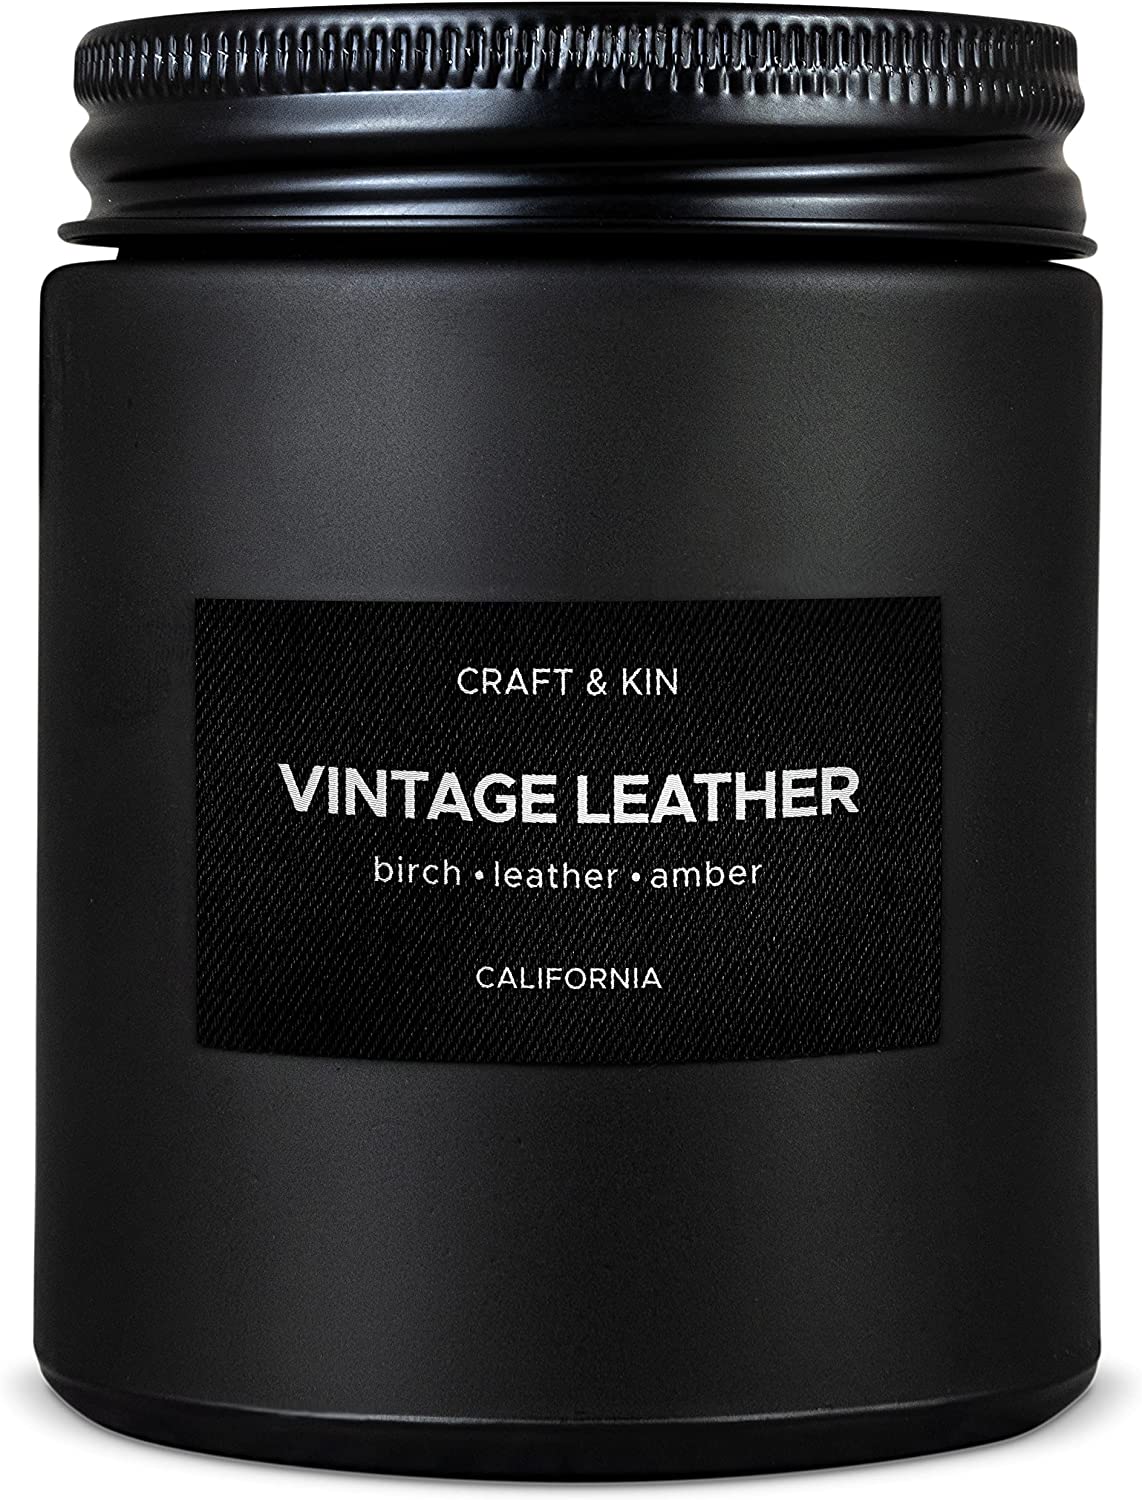 Craft & Kin Vintage Leather Candle - Husband-Approved Holiday Gift Guide